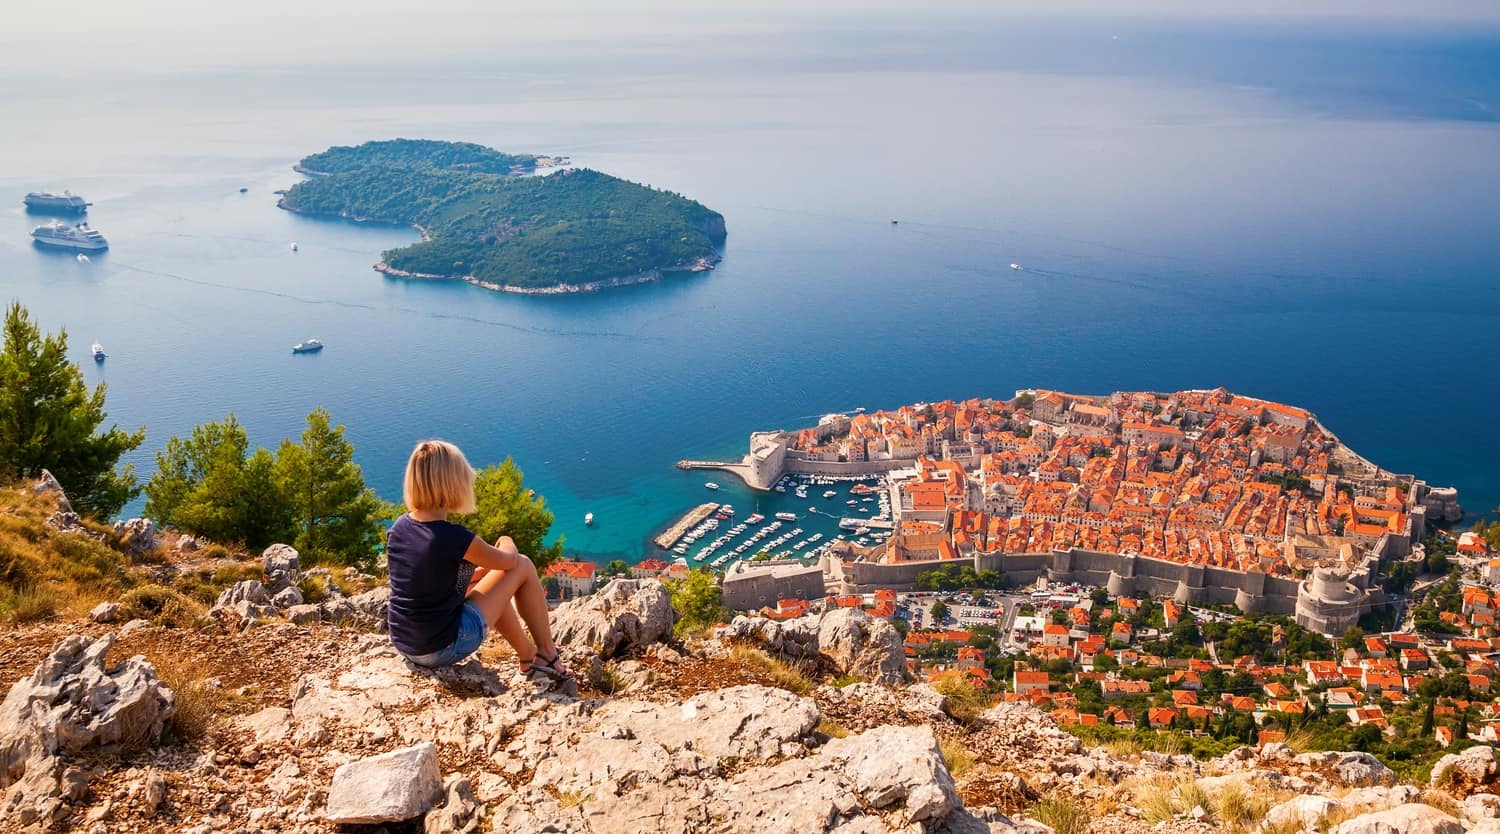 Girl overlooking Dubrovnik's Old Town from the top of a cliff. Ocean visible beyond the harbour area, with ferries and a small island.